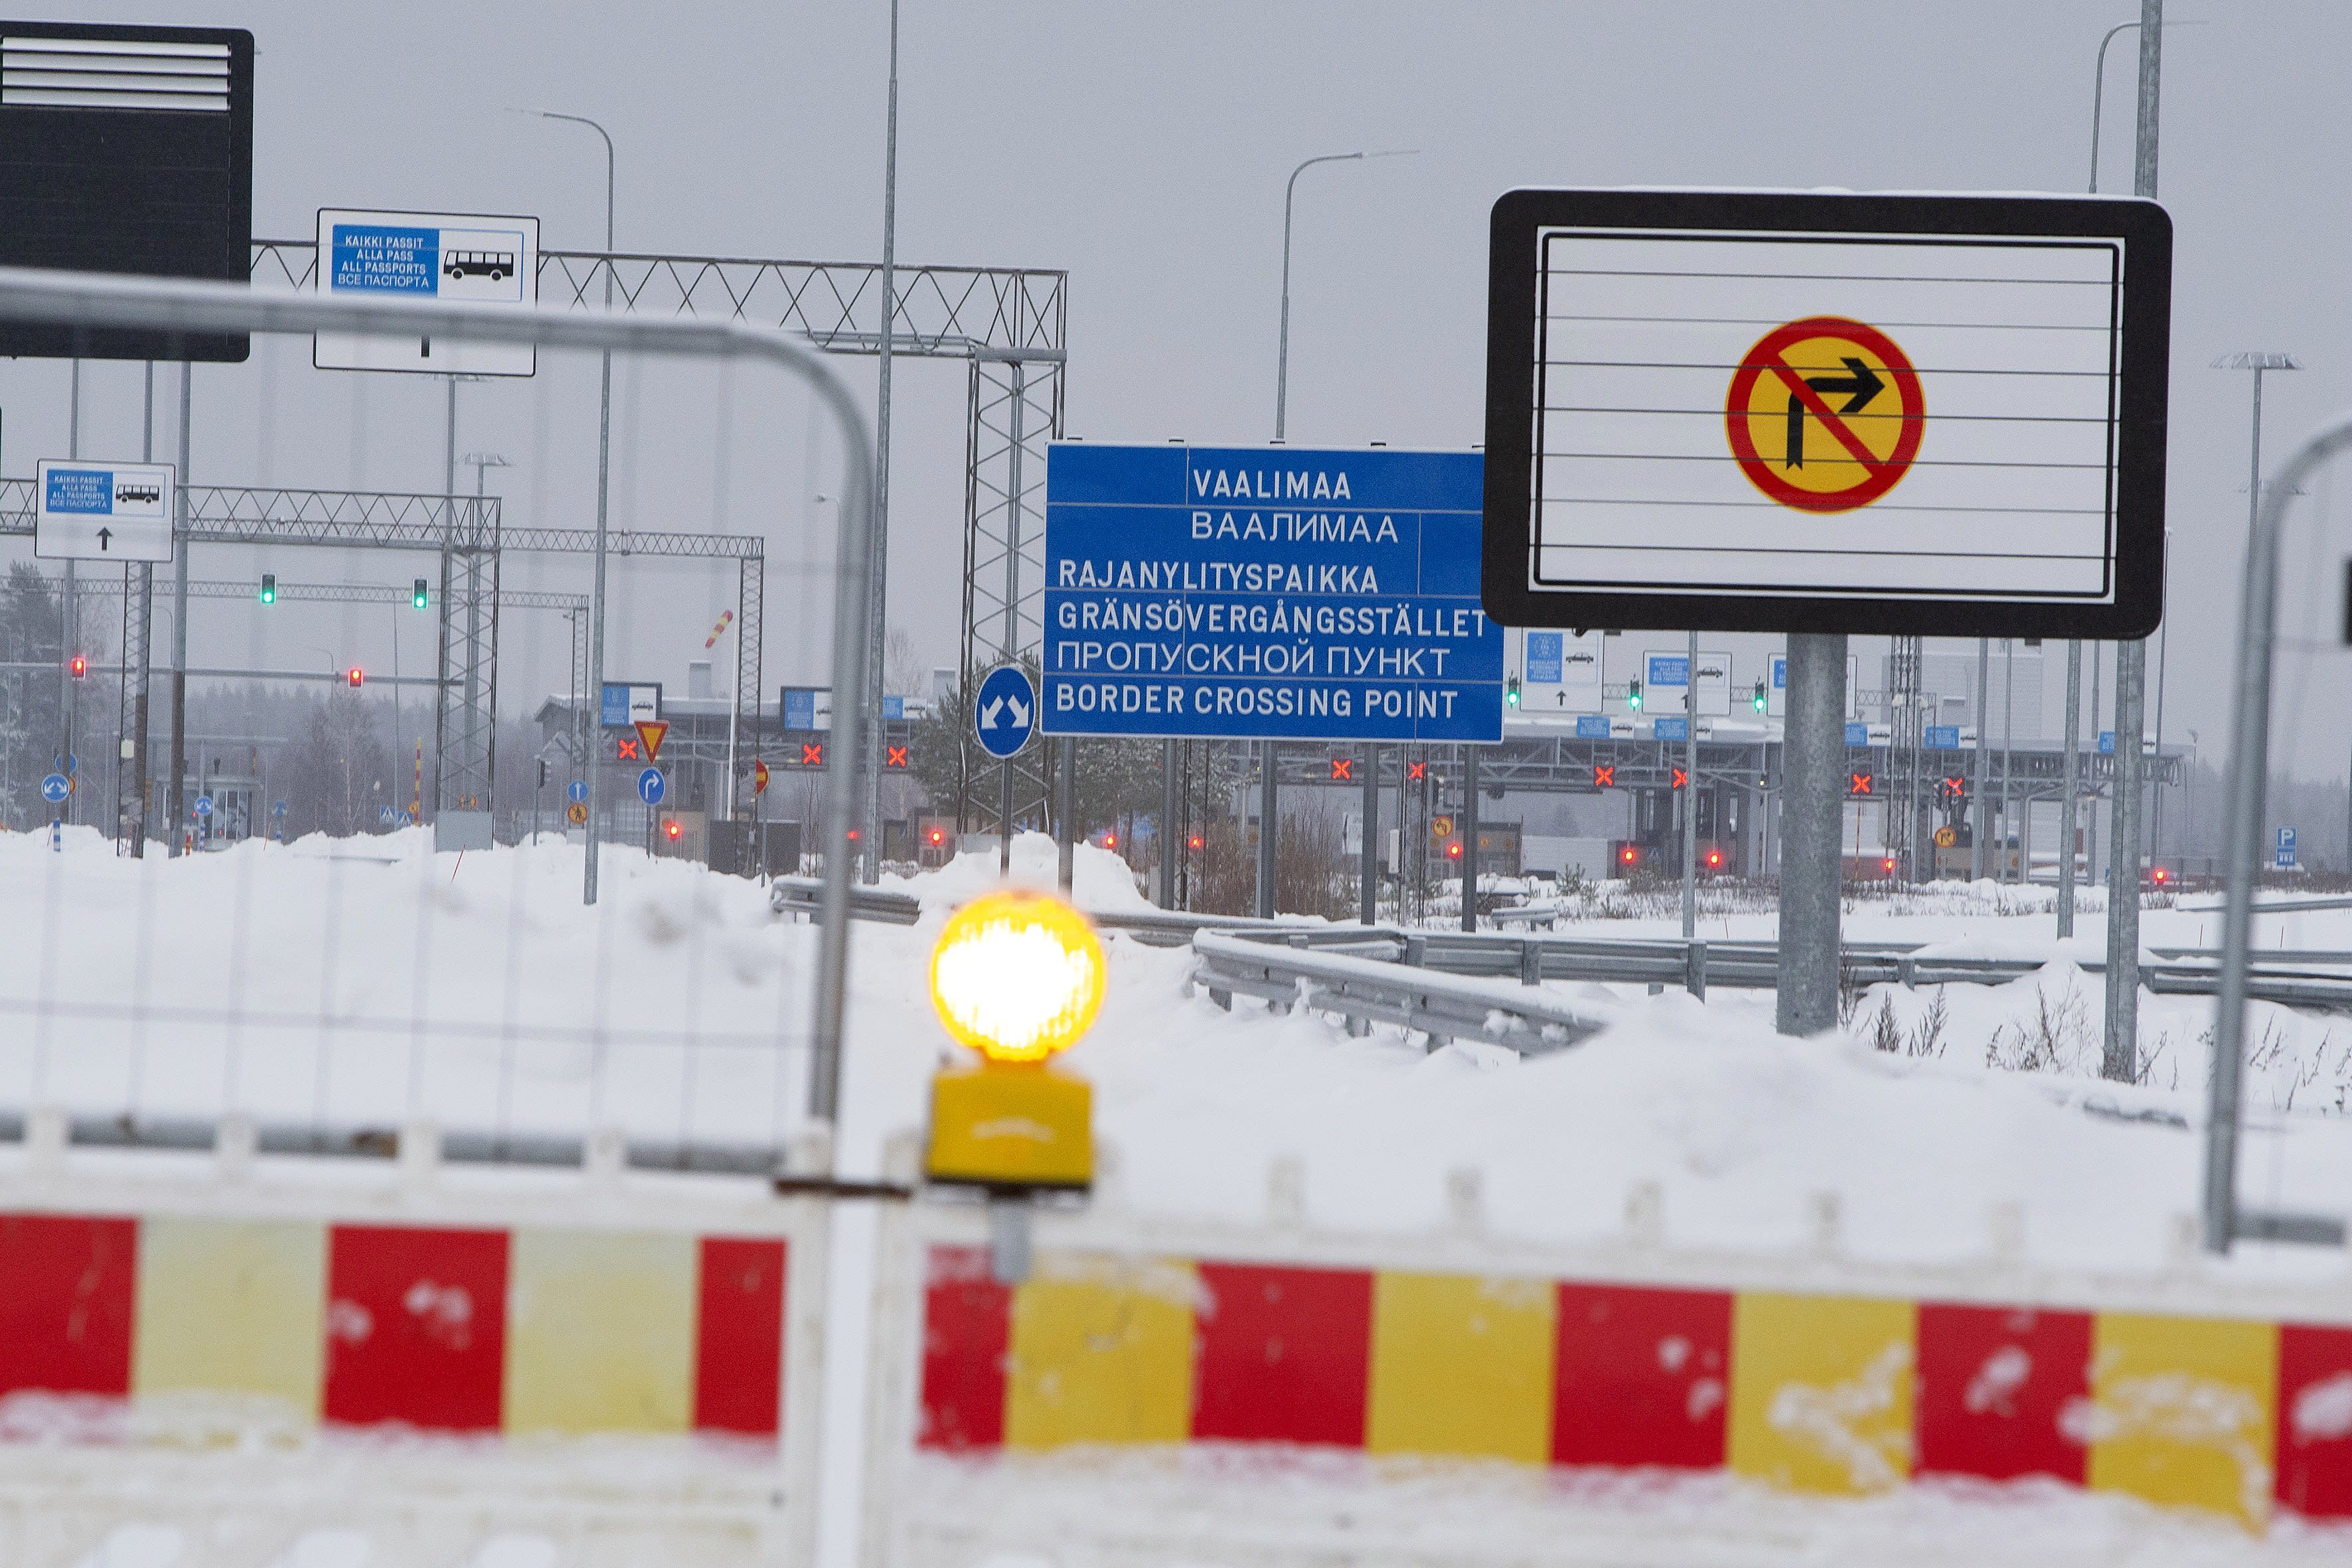 Nerves frayed at the Vaalimaa border crossing when Finland-Russia traffic ends early